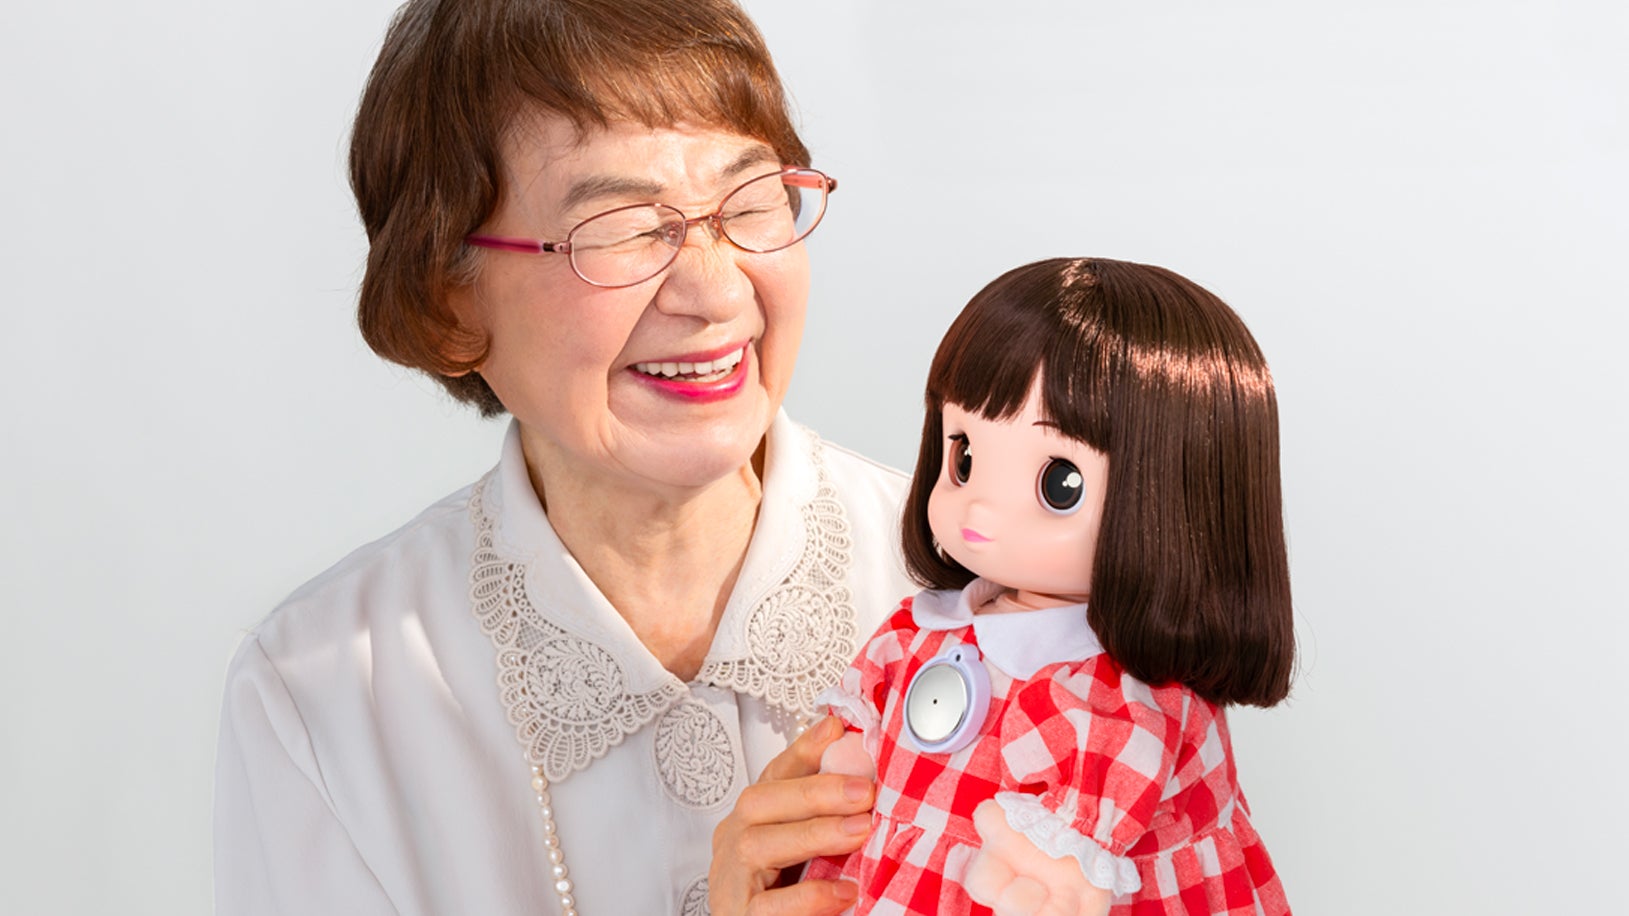 Somehow Japan Making Robotic Grandkids For Lonely Grandparents Isn’t The Saddest News Of The Week